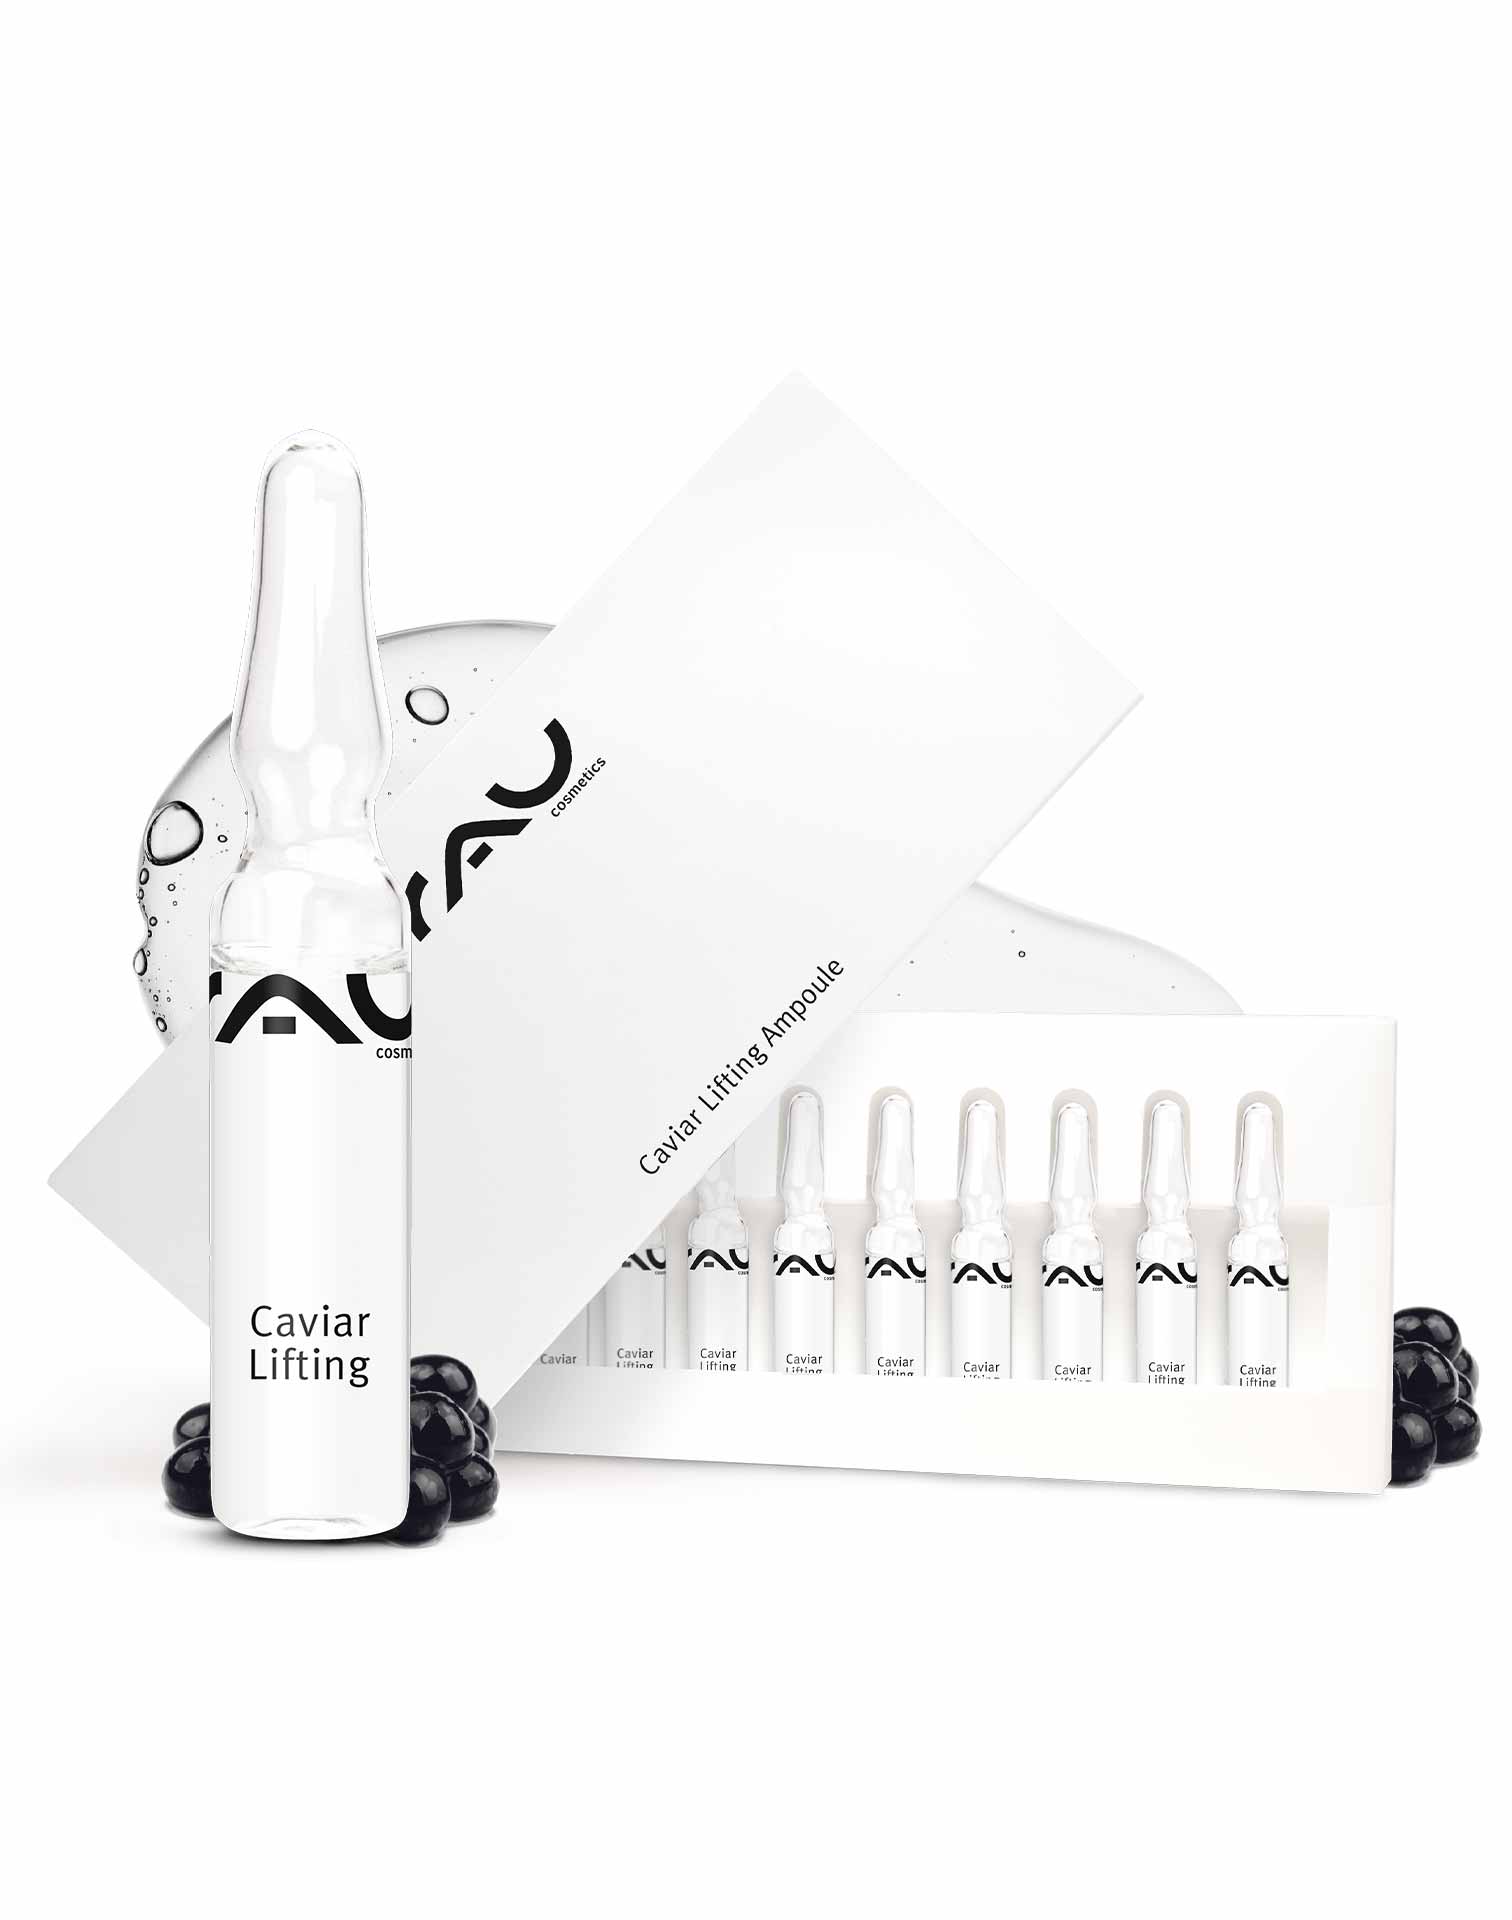 RAU Caviar Lifting Ampoules 10 x 2 ml - Highly Effective Anti-Aging Ampoule